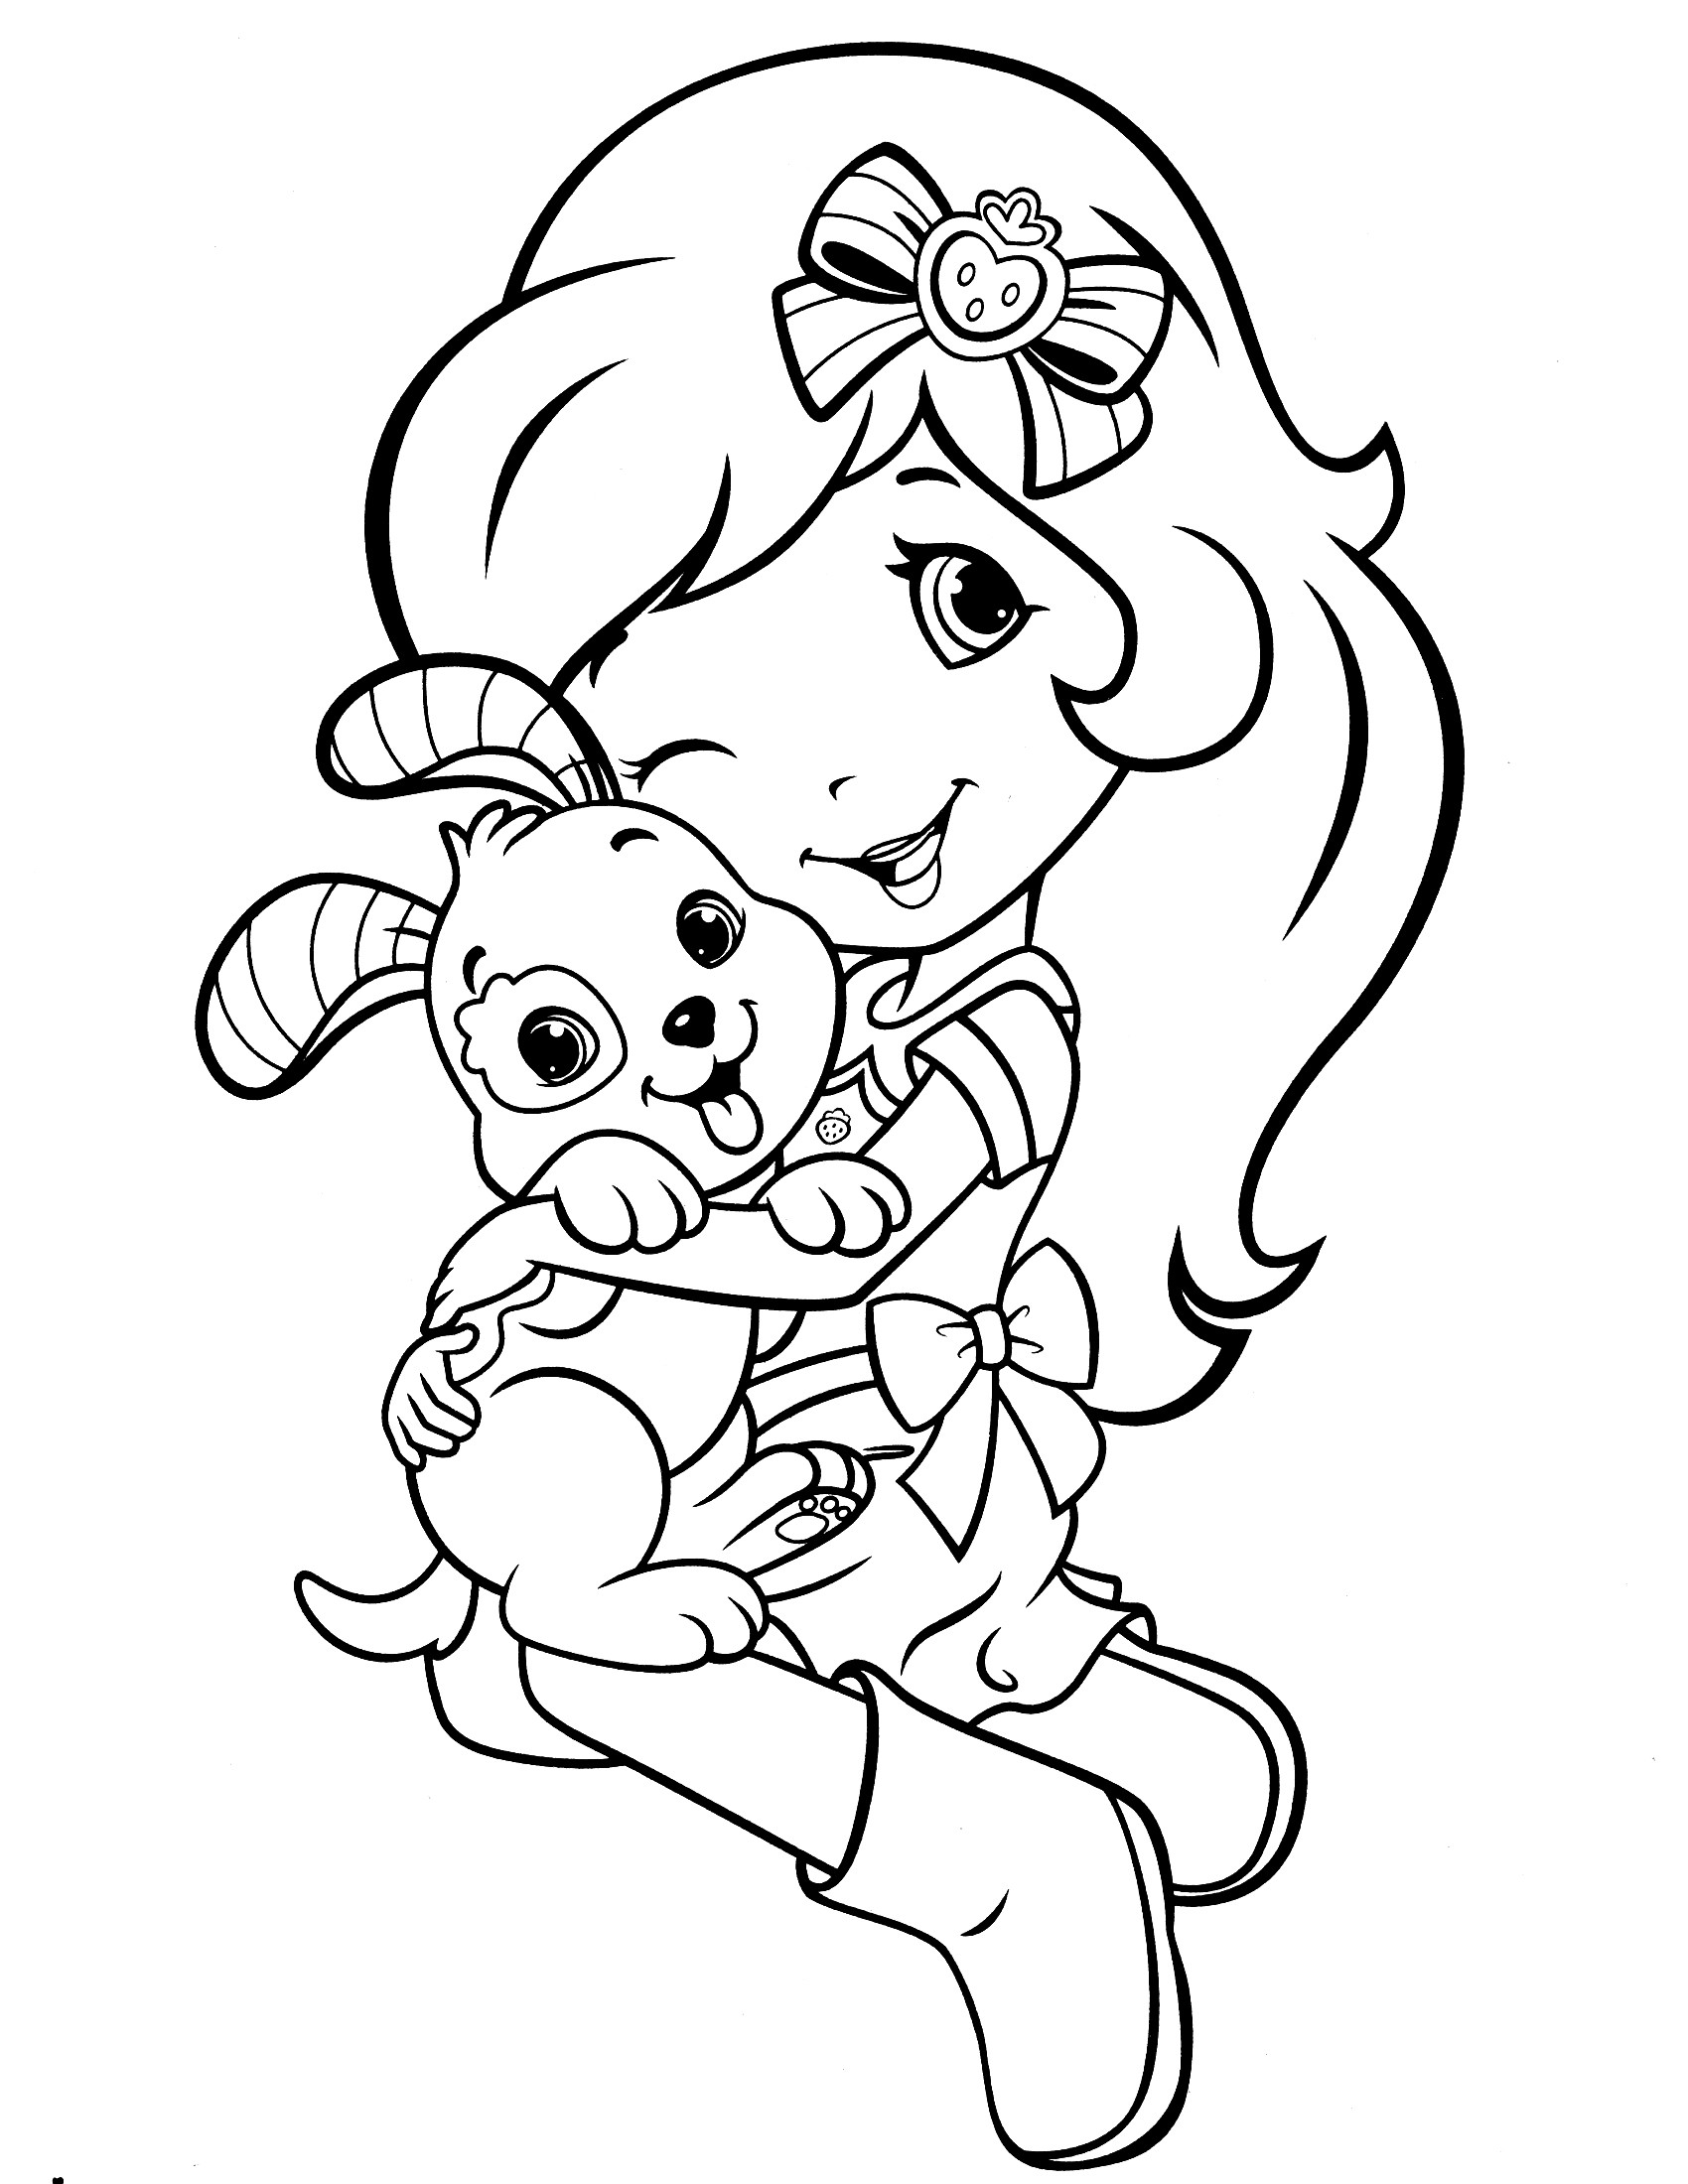 Cool Coloring Books For Kids
 Strawberry Shortcake Coloring Pages Cool coloring pages